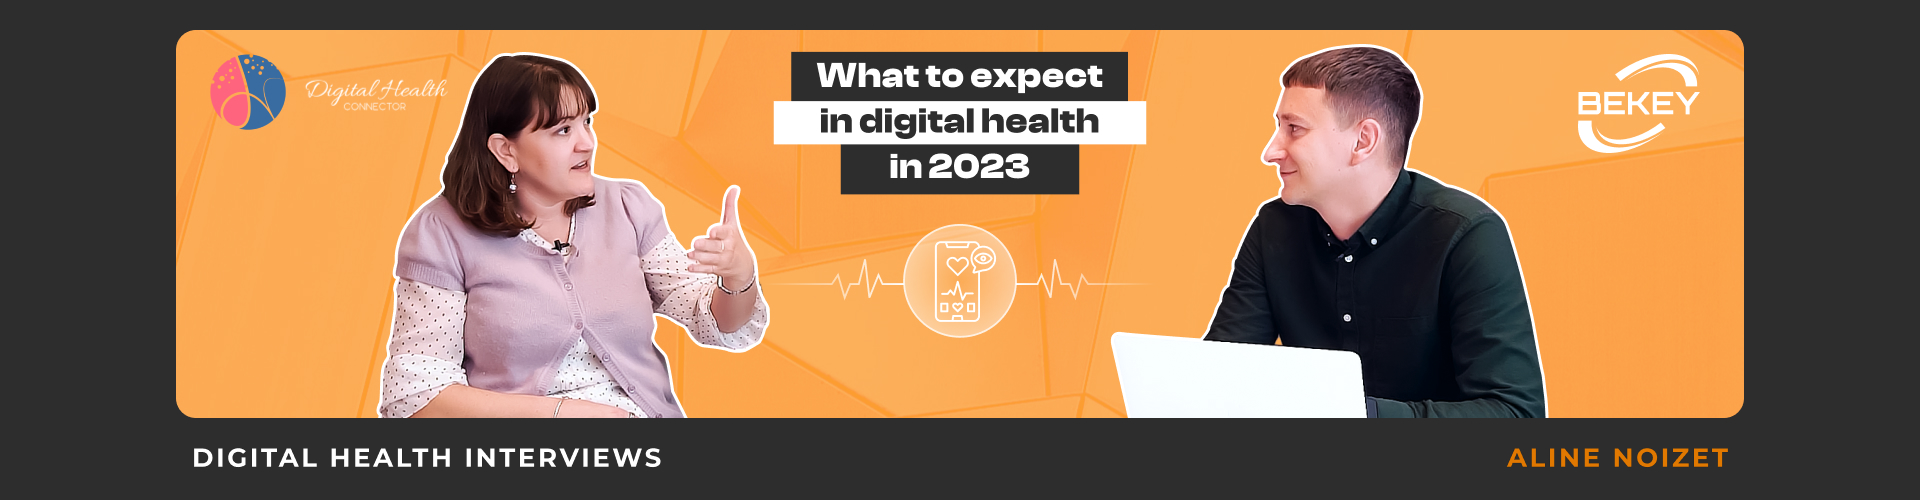 What to Expect in Digital Health in 2023? Digital Health Interviews: Aline Noizet - image